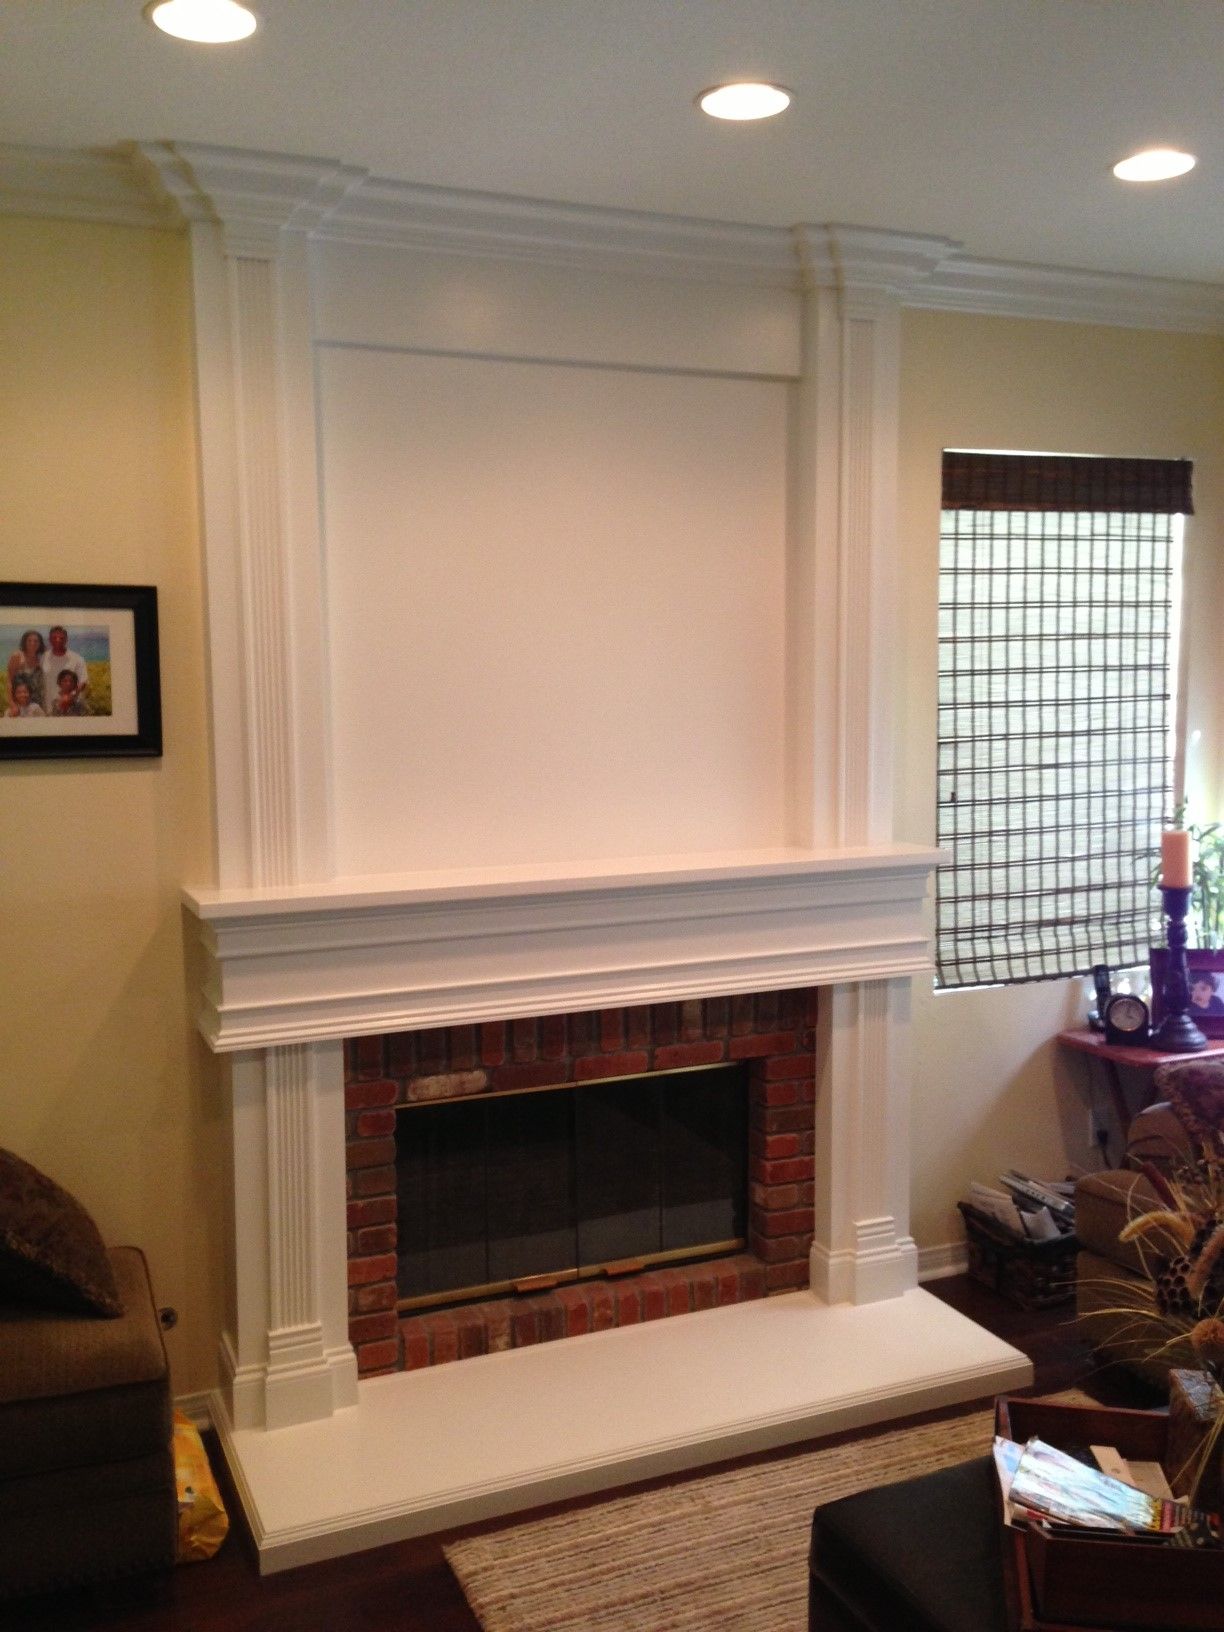 Installing A Mantel On A Brick Fireplace Awesome Custom Mantel Living Room